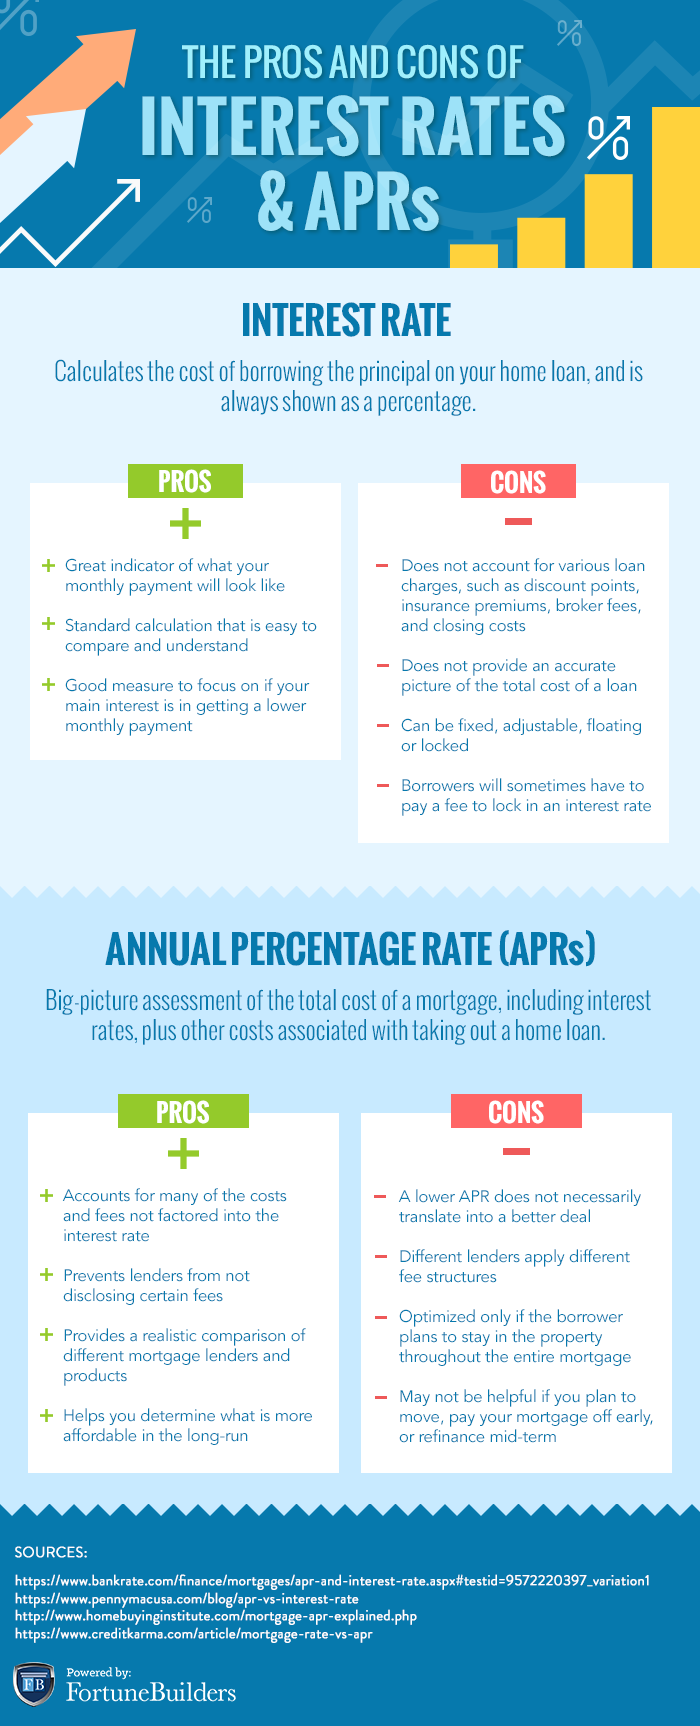 Pros and cons of APR versus interest rate